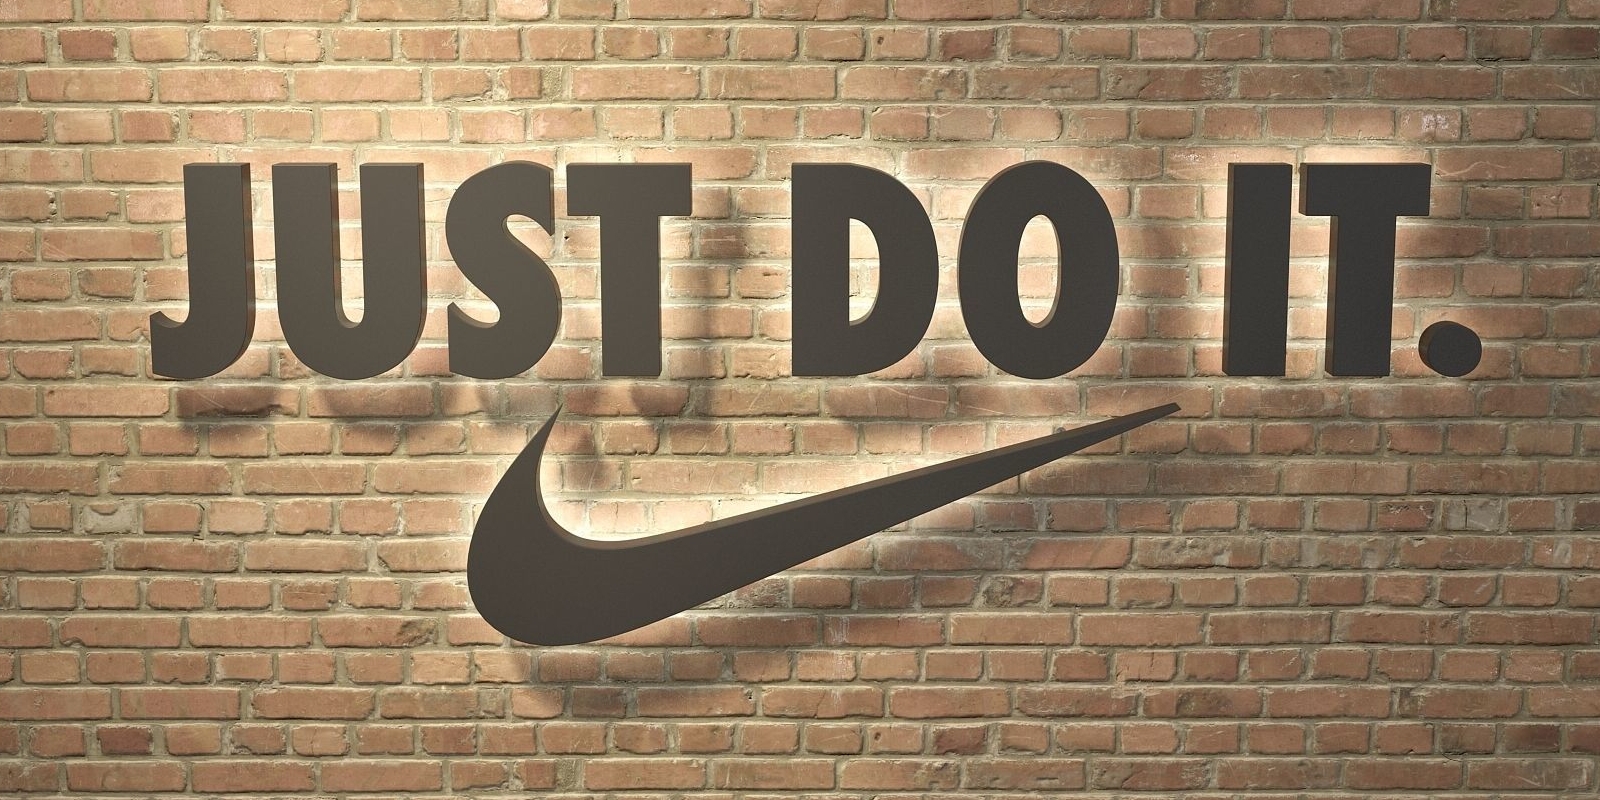 Just do it слоган. Nike just do it. Nike слоган. Найк just do it. Слоган Nike just do it.